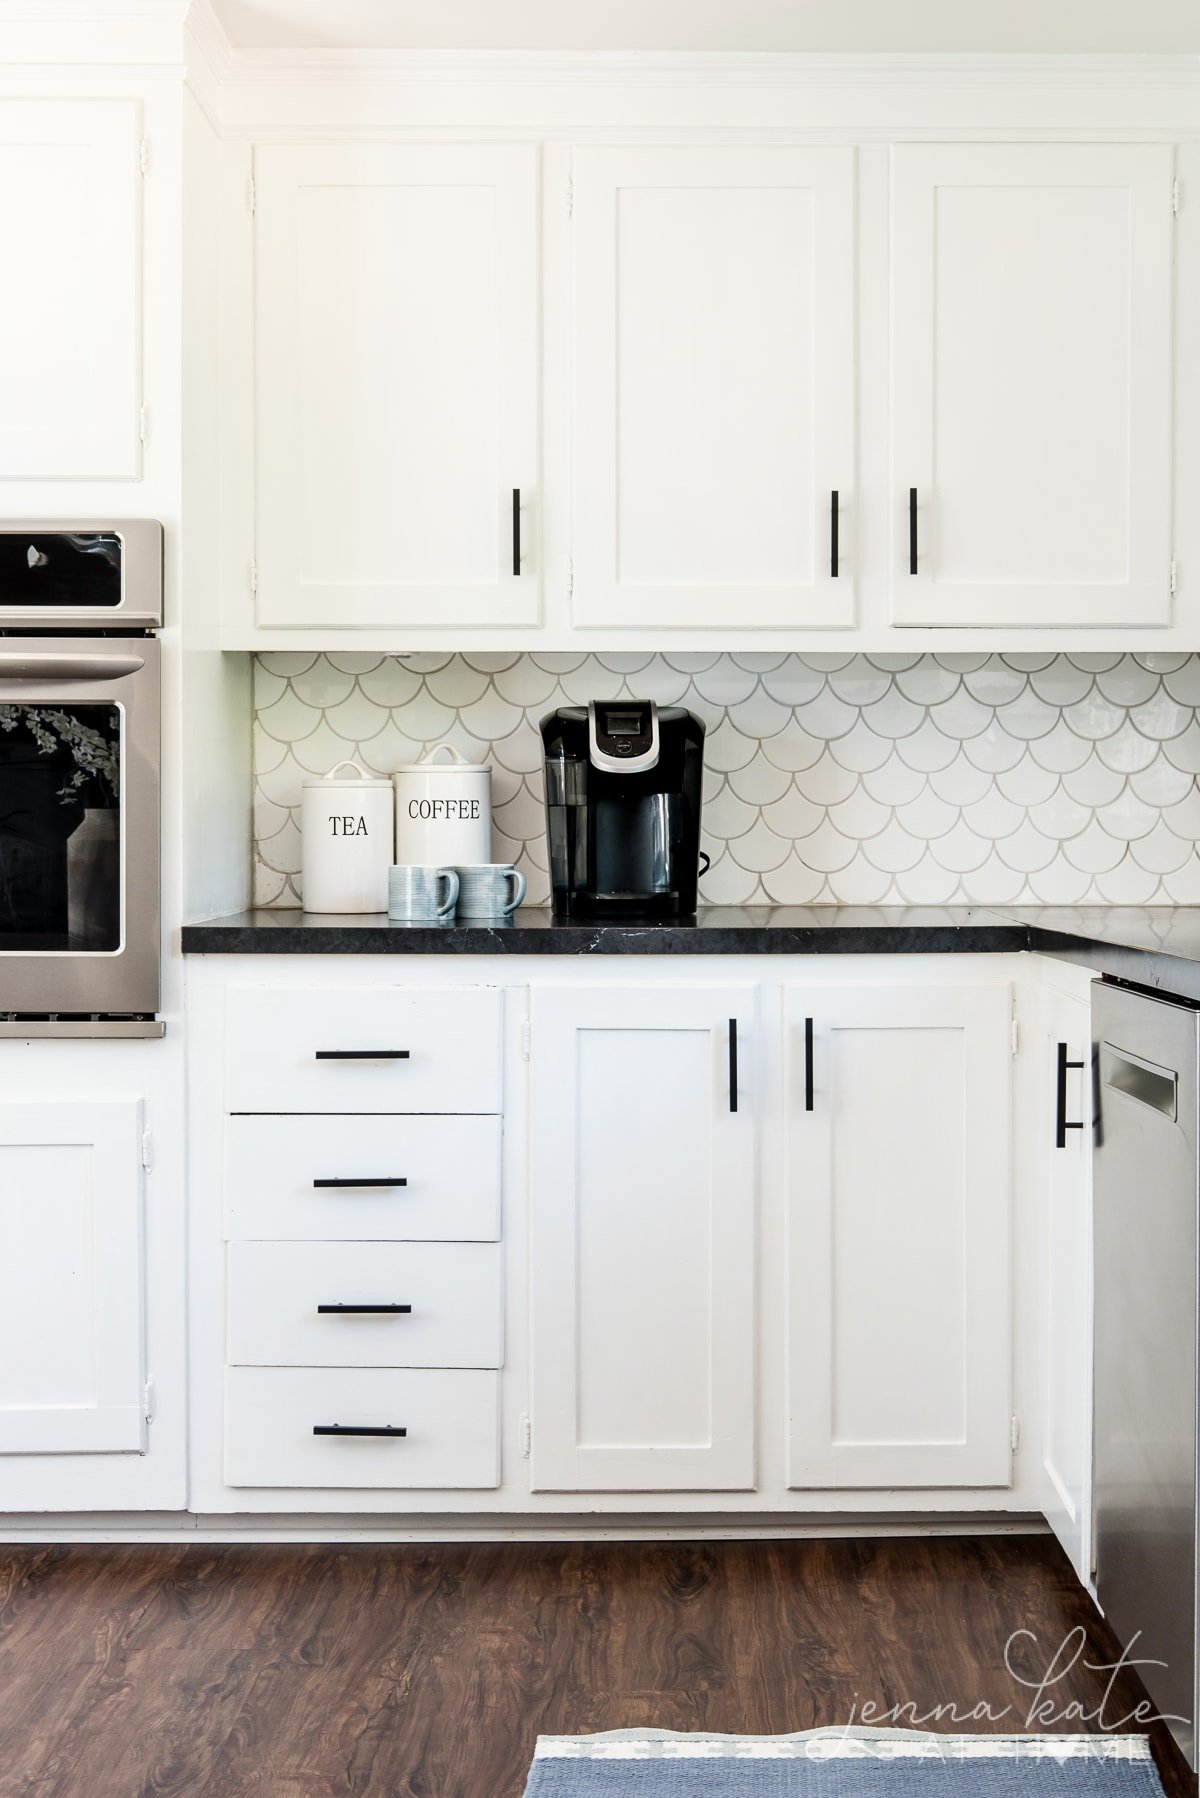 Kitchen Hardware Trends 2021 Jenna, What Color Hardware Looks Good On White Cabinets